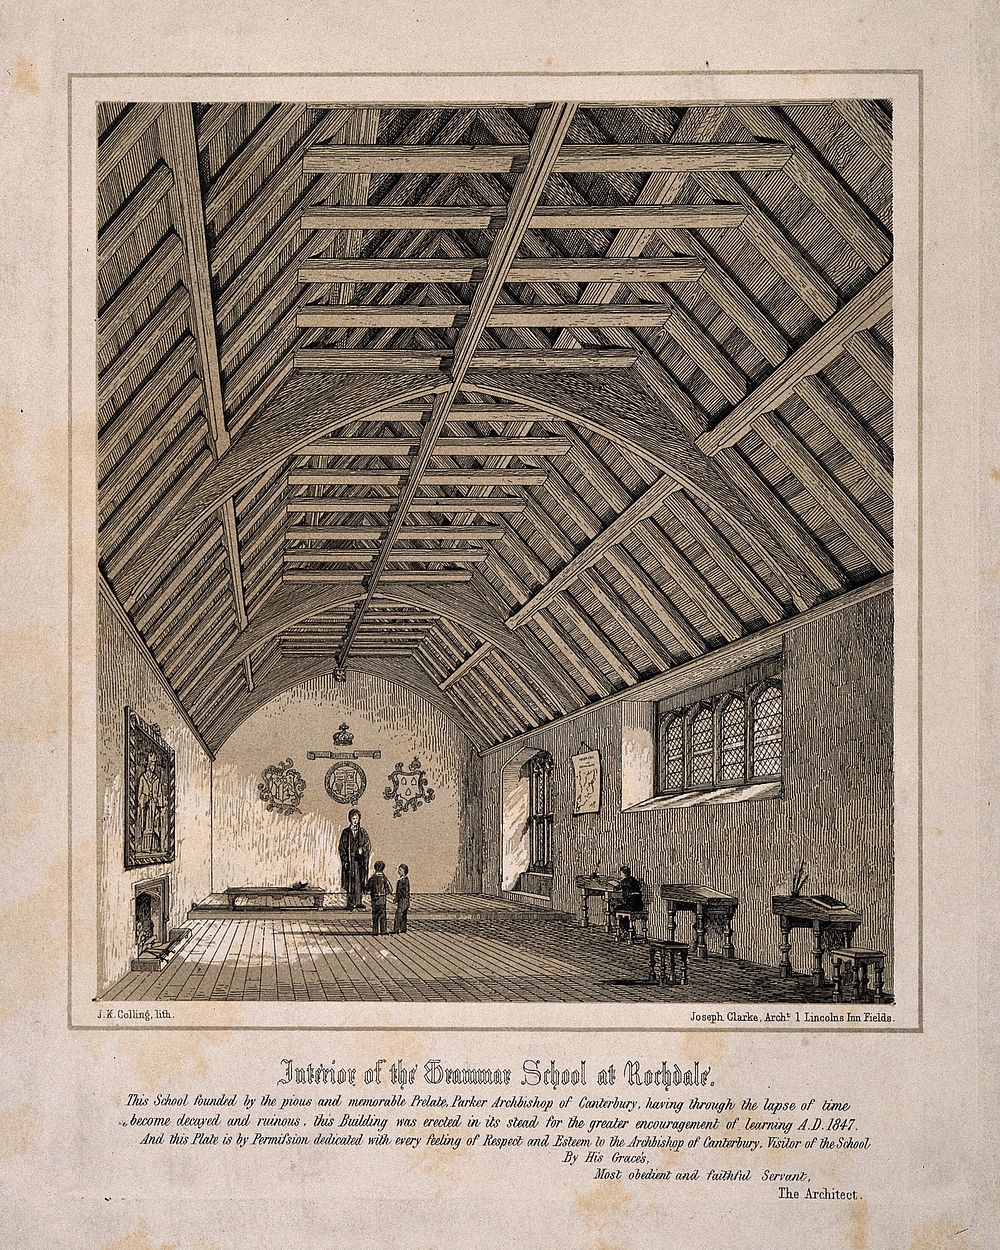 Grammar School, Rochdale, Lancashire: interior. Tinted lithograph by J.K. Colling after J. Clarke.